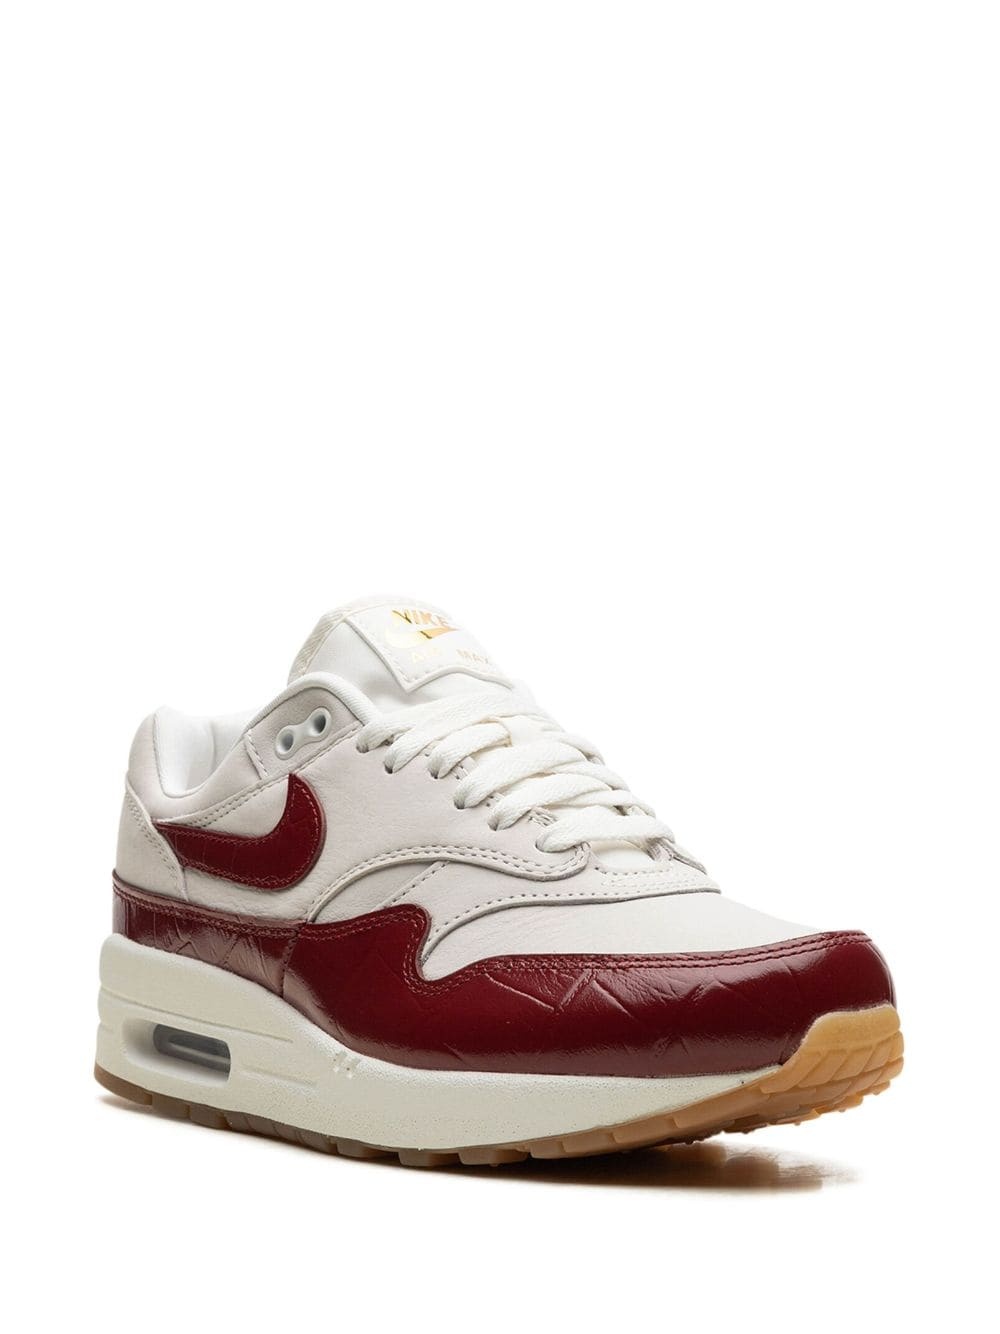 Air Max 1 LX "Team Red" sneakers - 2